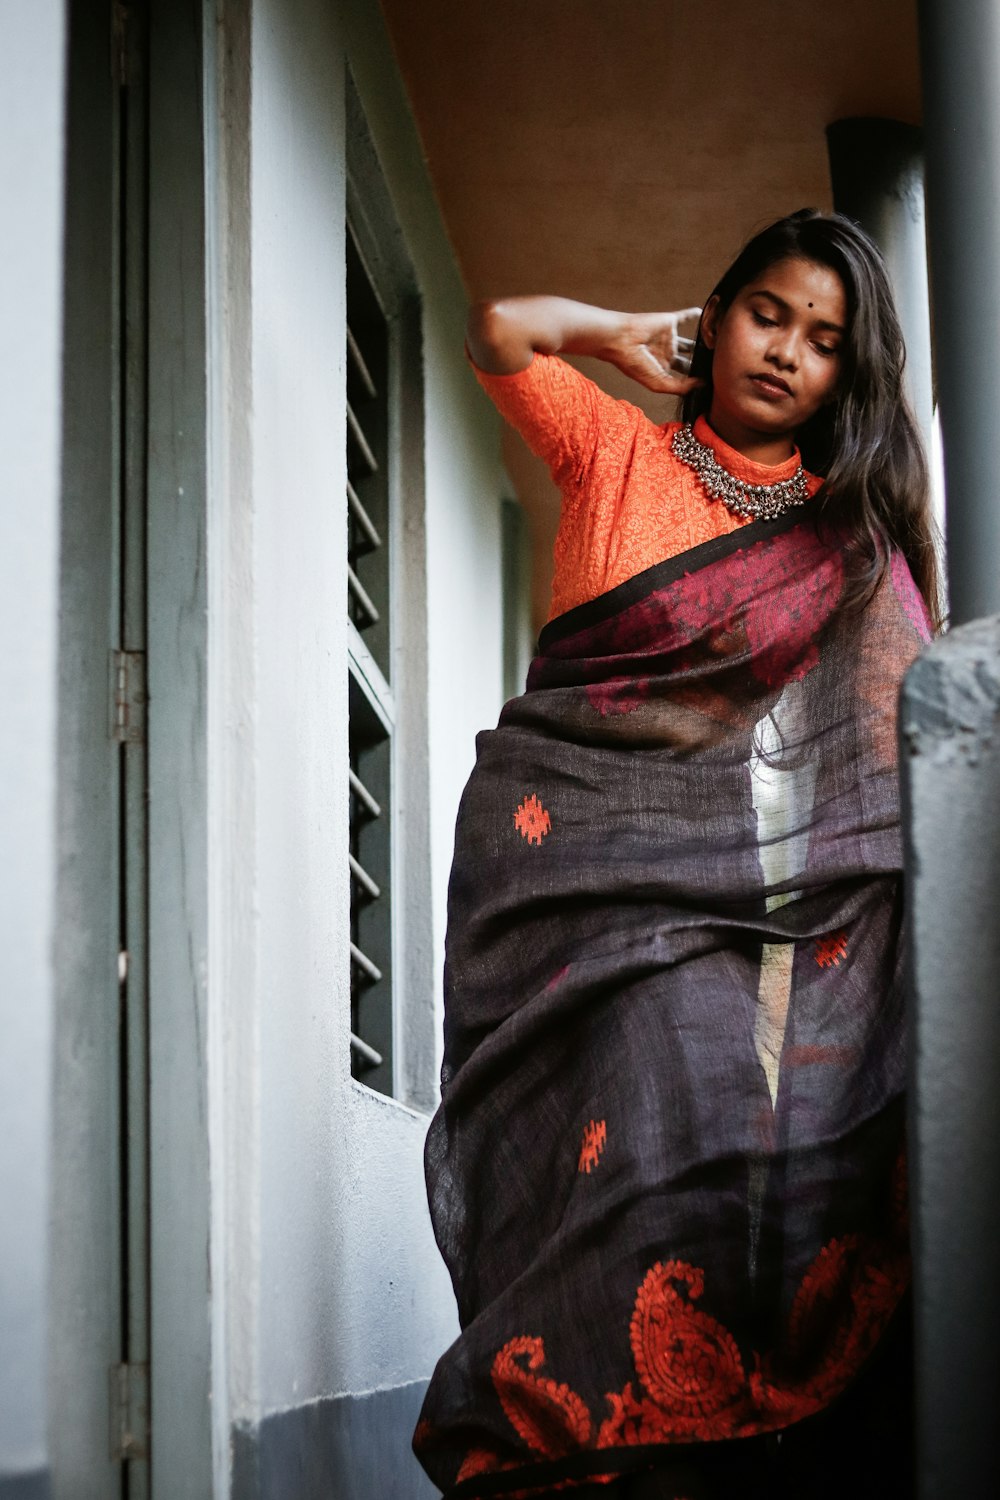 a woman in a sari leaning out of a window